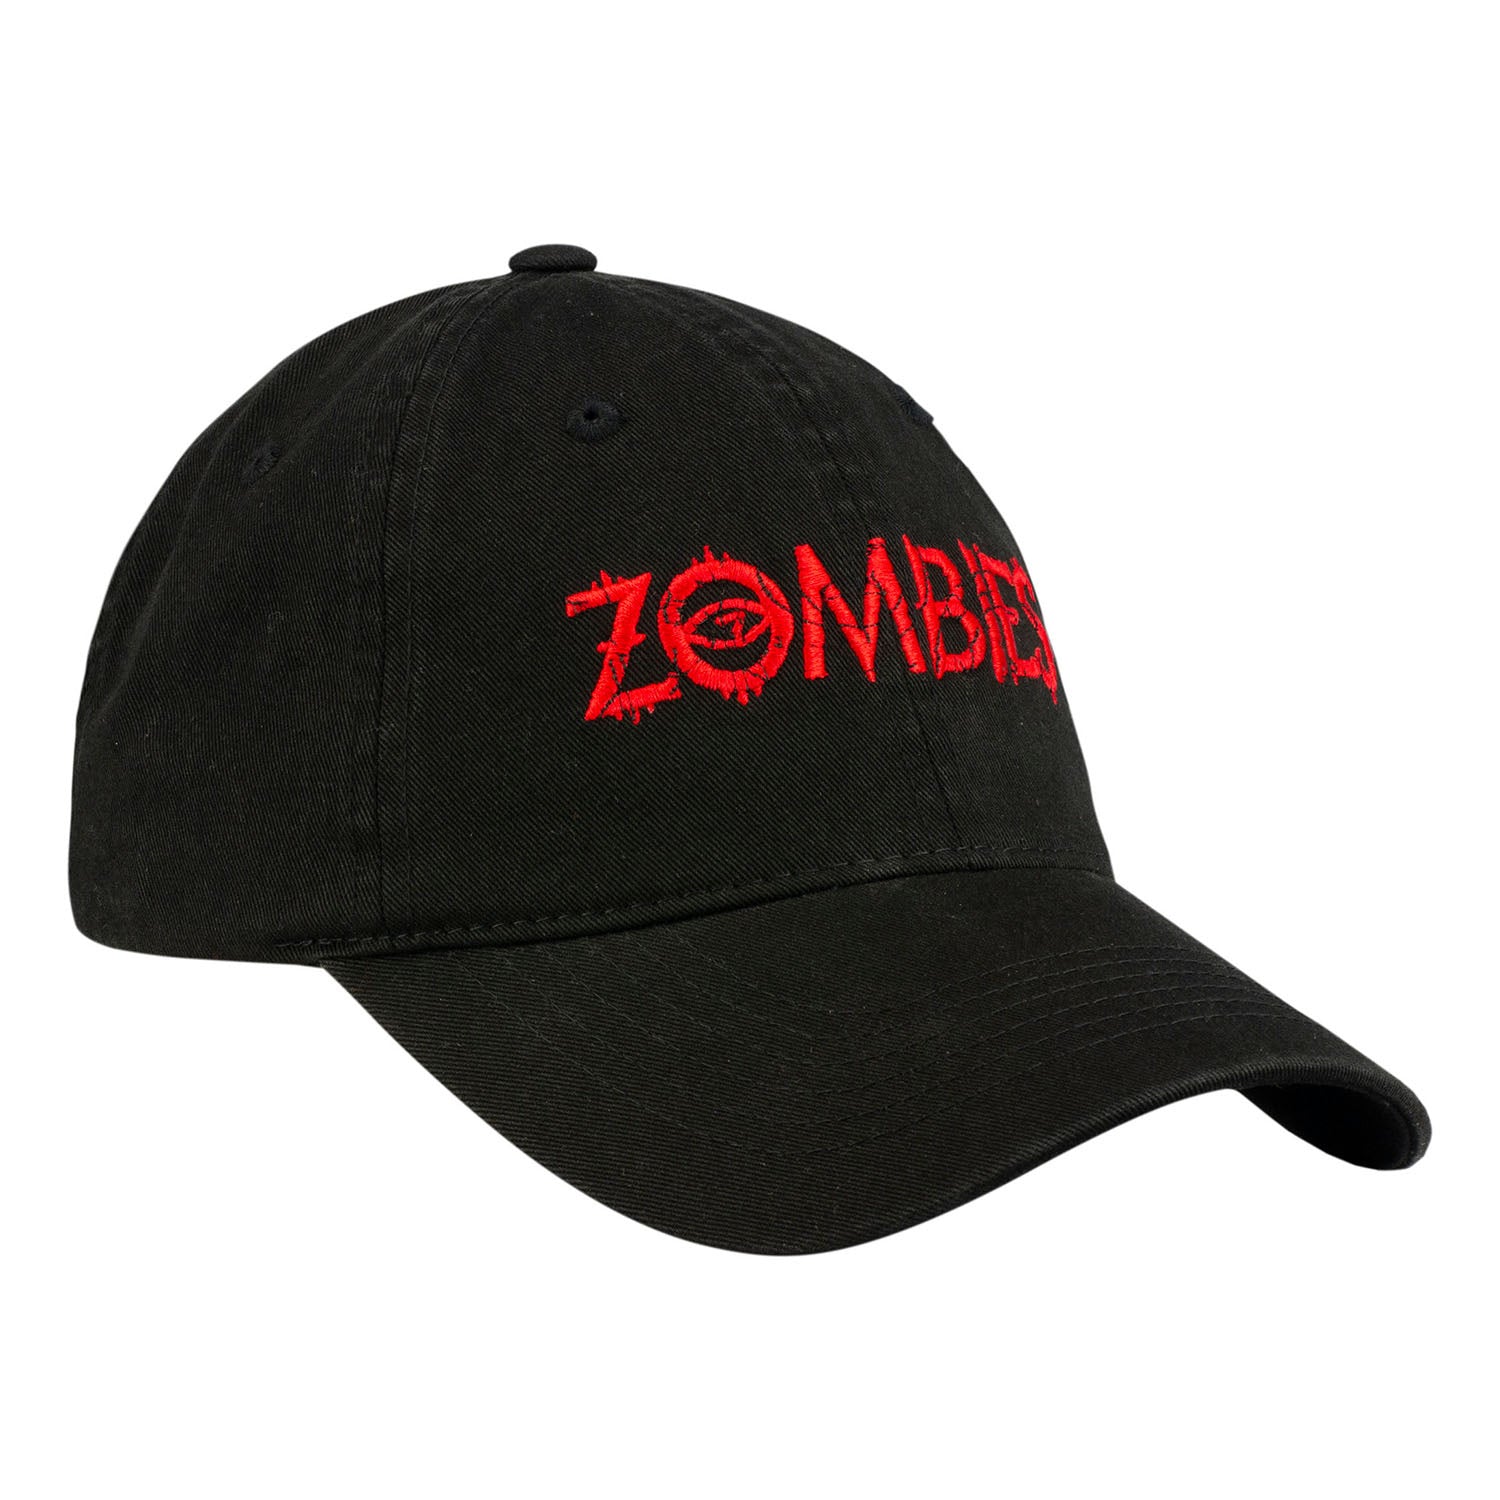 Call of Duty Black Zombies Logo Hat - Right View